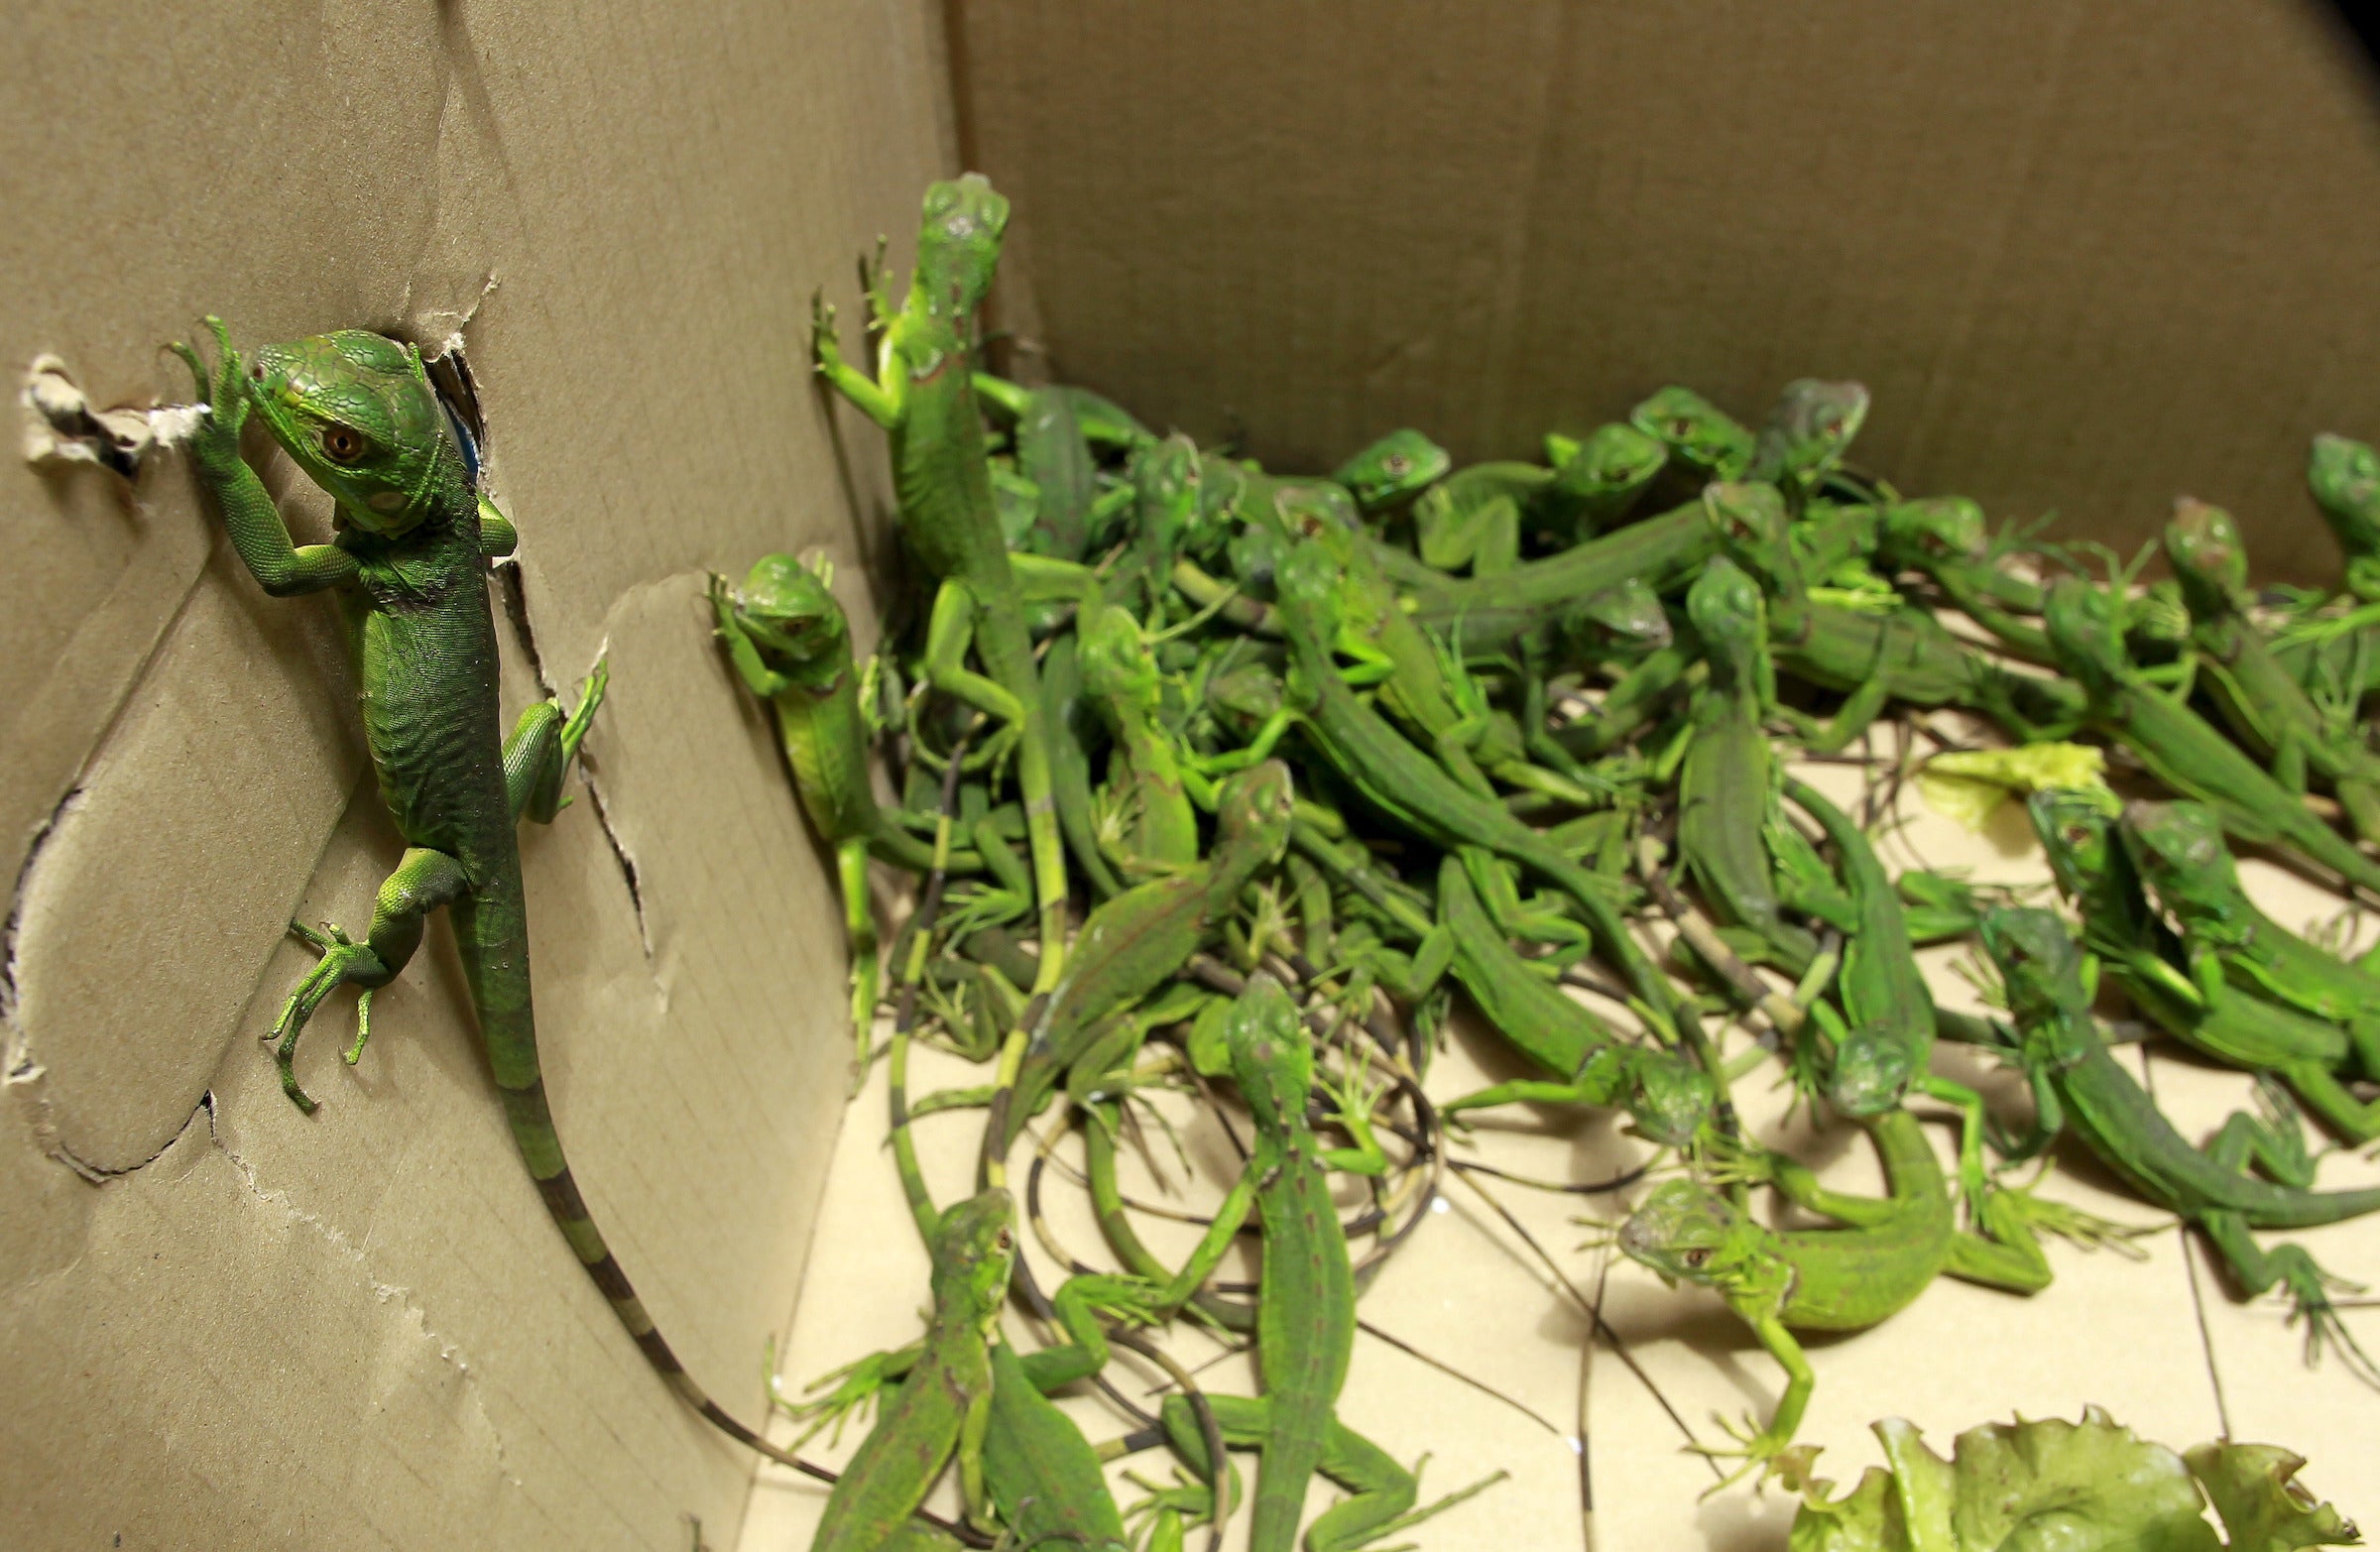 National police of Costa Rica rescued 81 green iguanas which had been confined to a box in San Jose